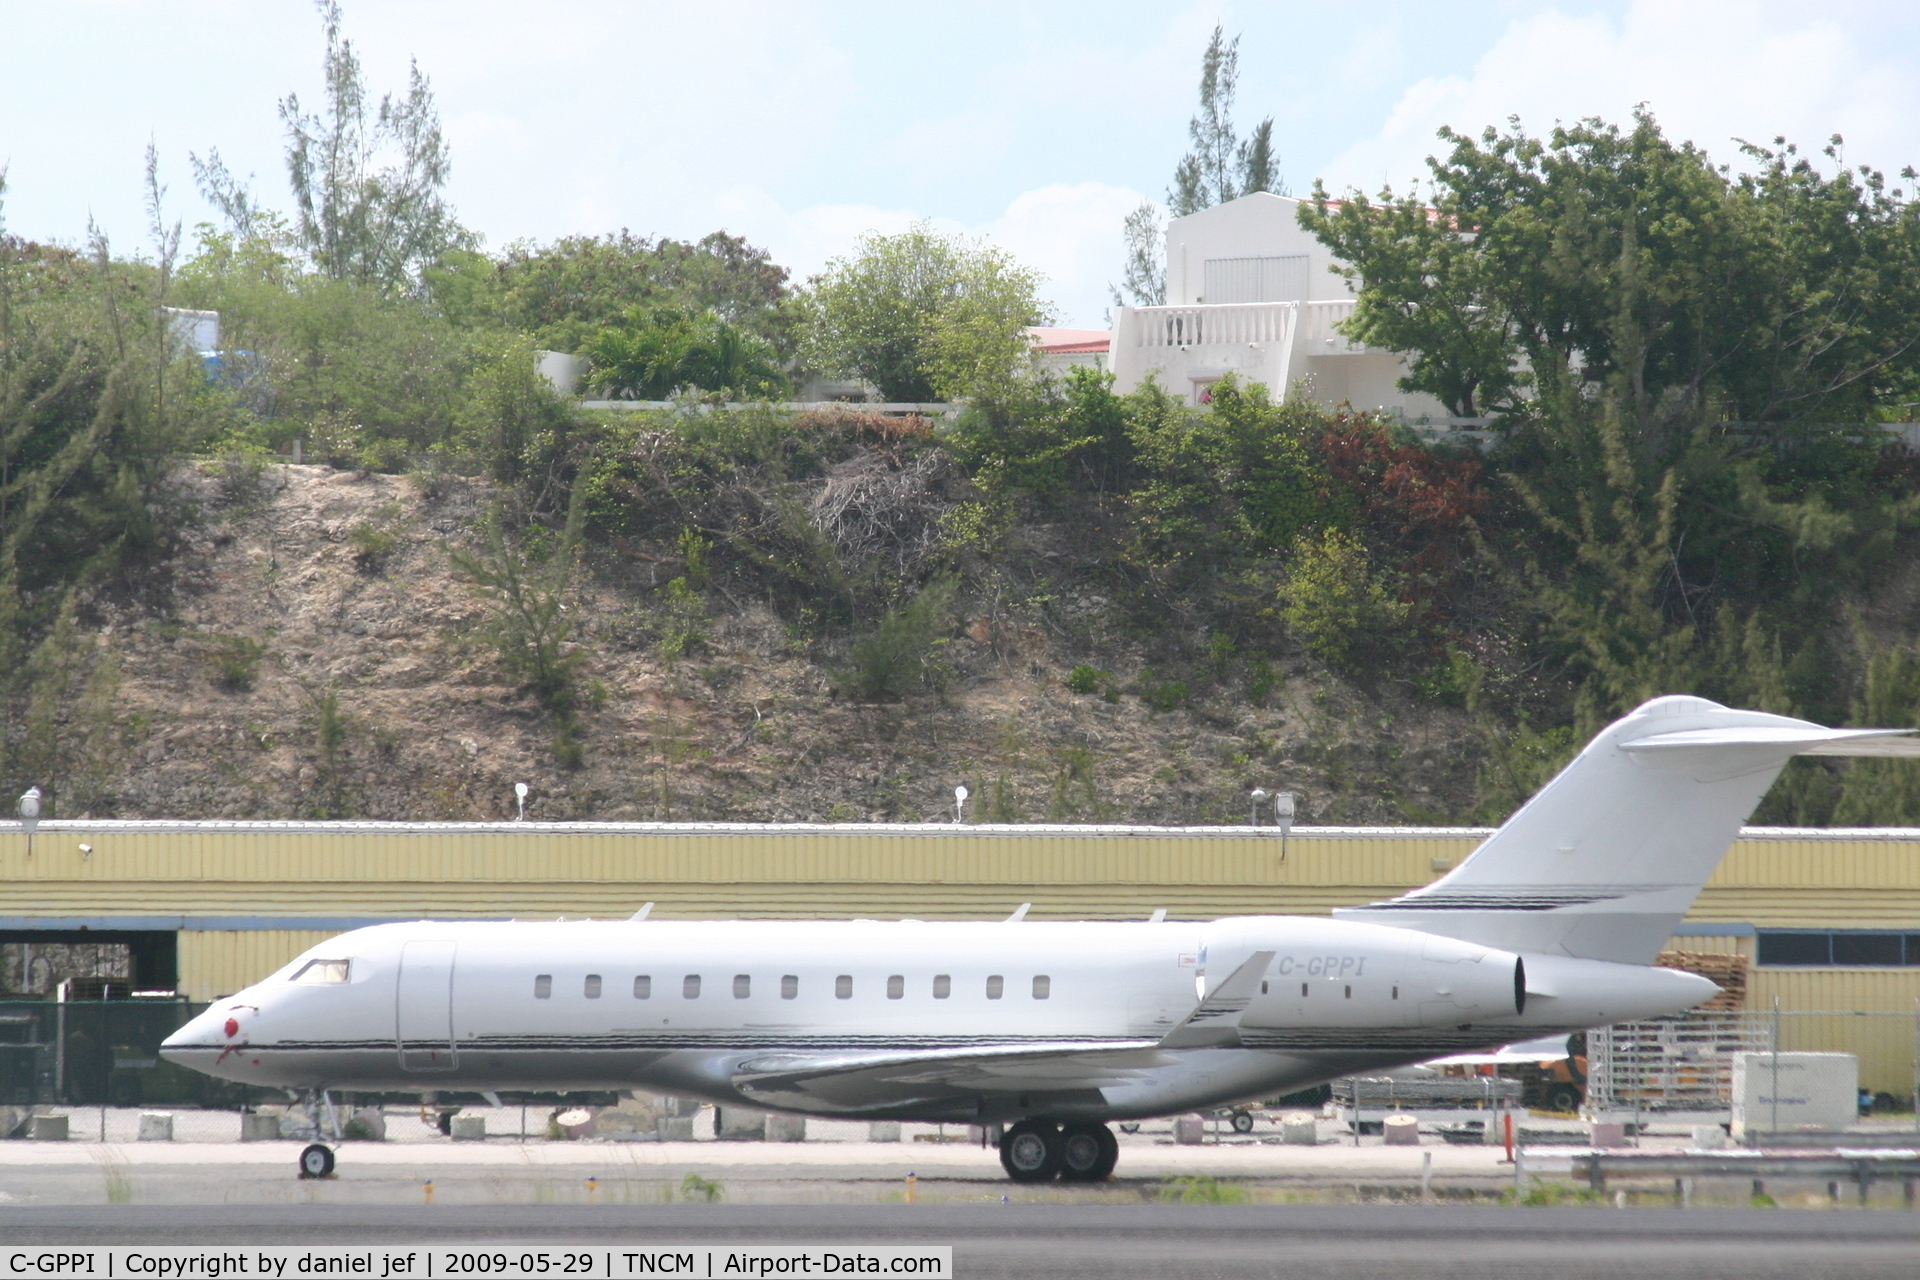 C-GPPI, 2005 Bombardier BD-700-1A11 Global 5000 C/N 9158, park at the cargo ramp